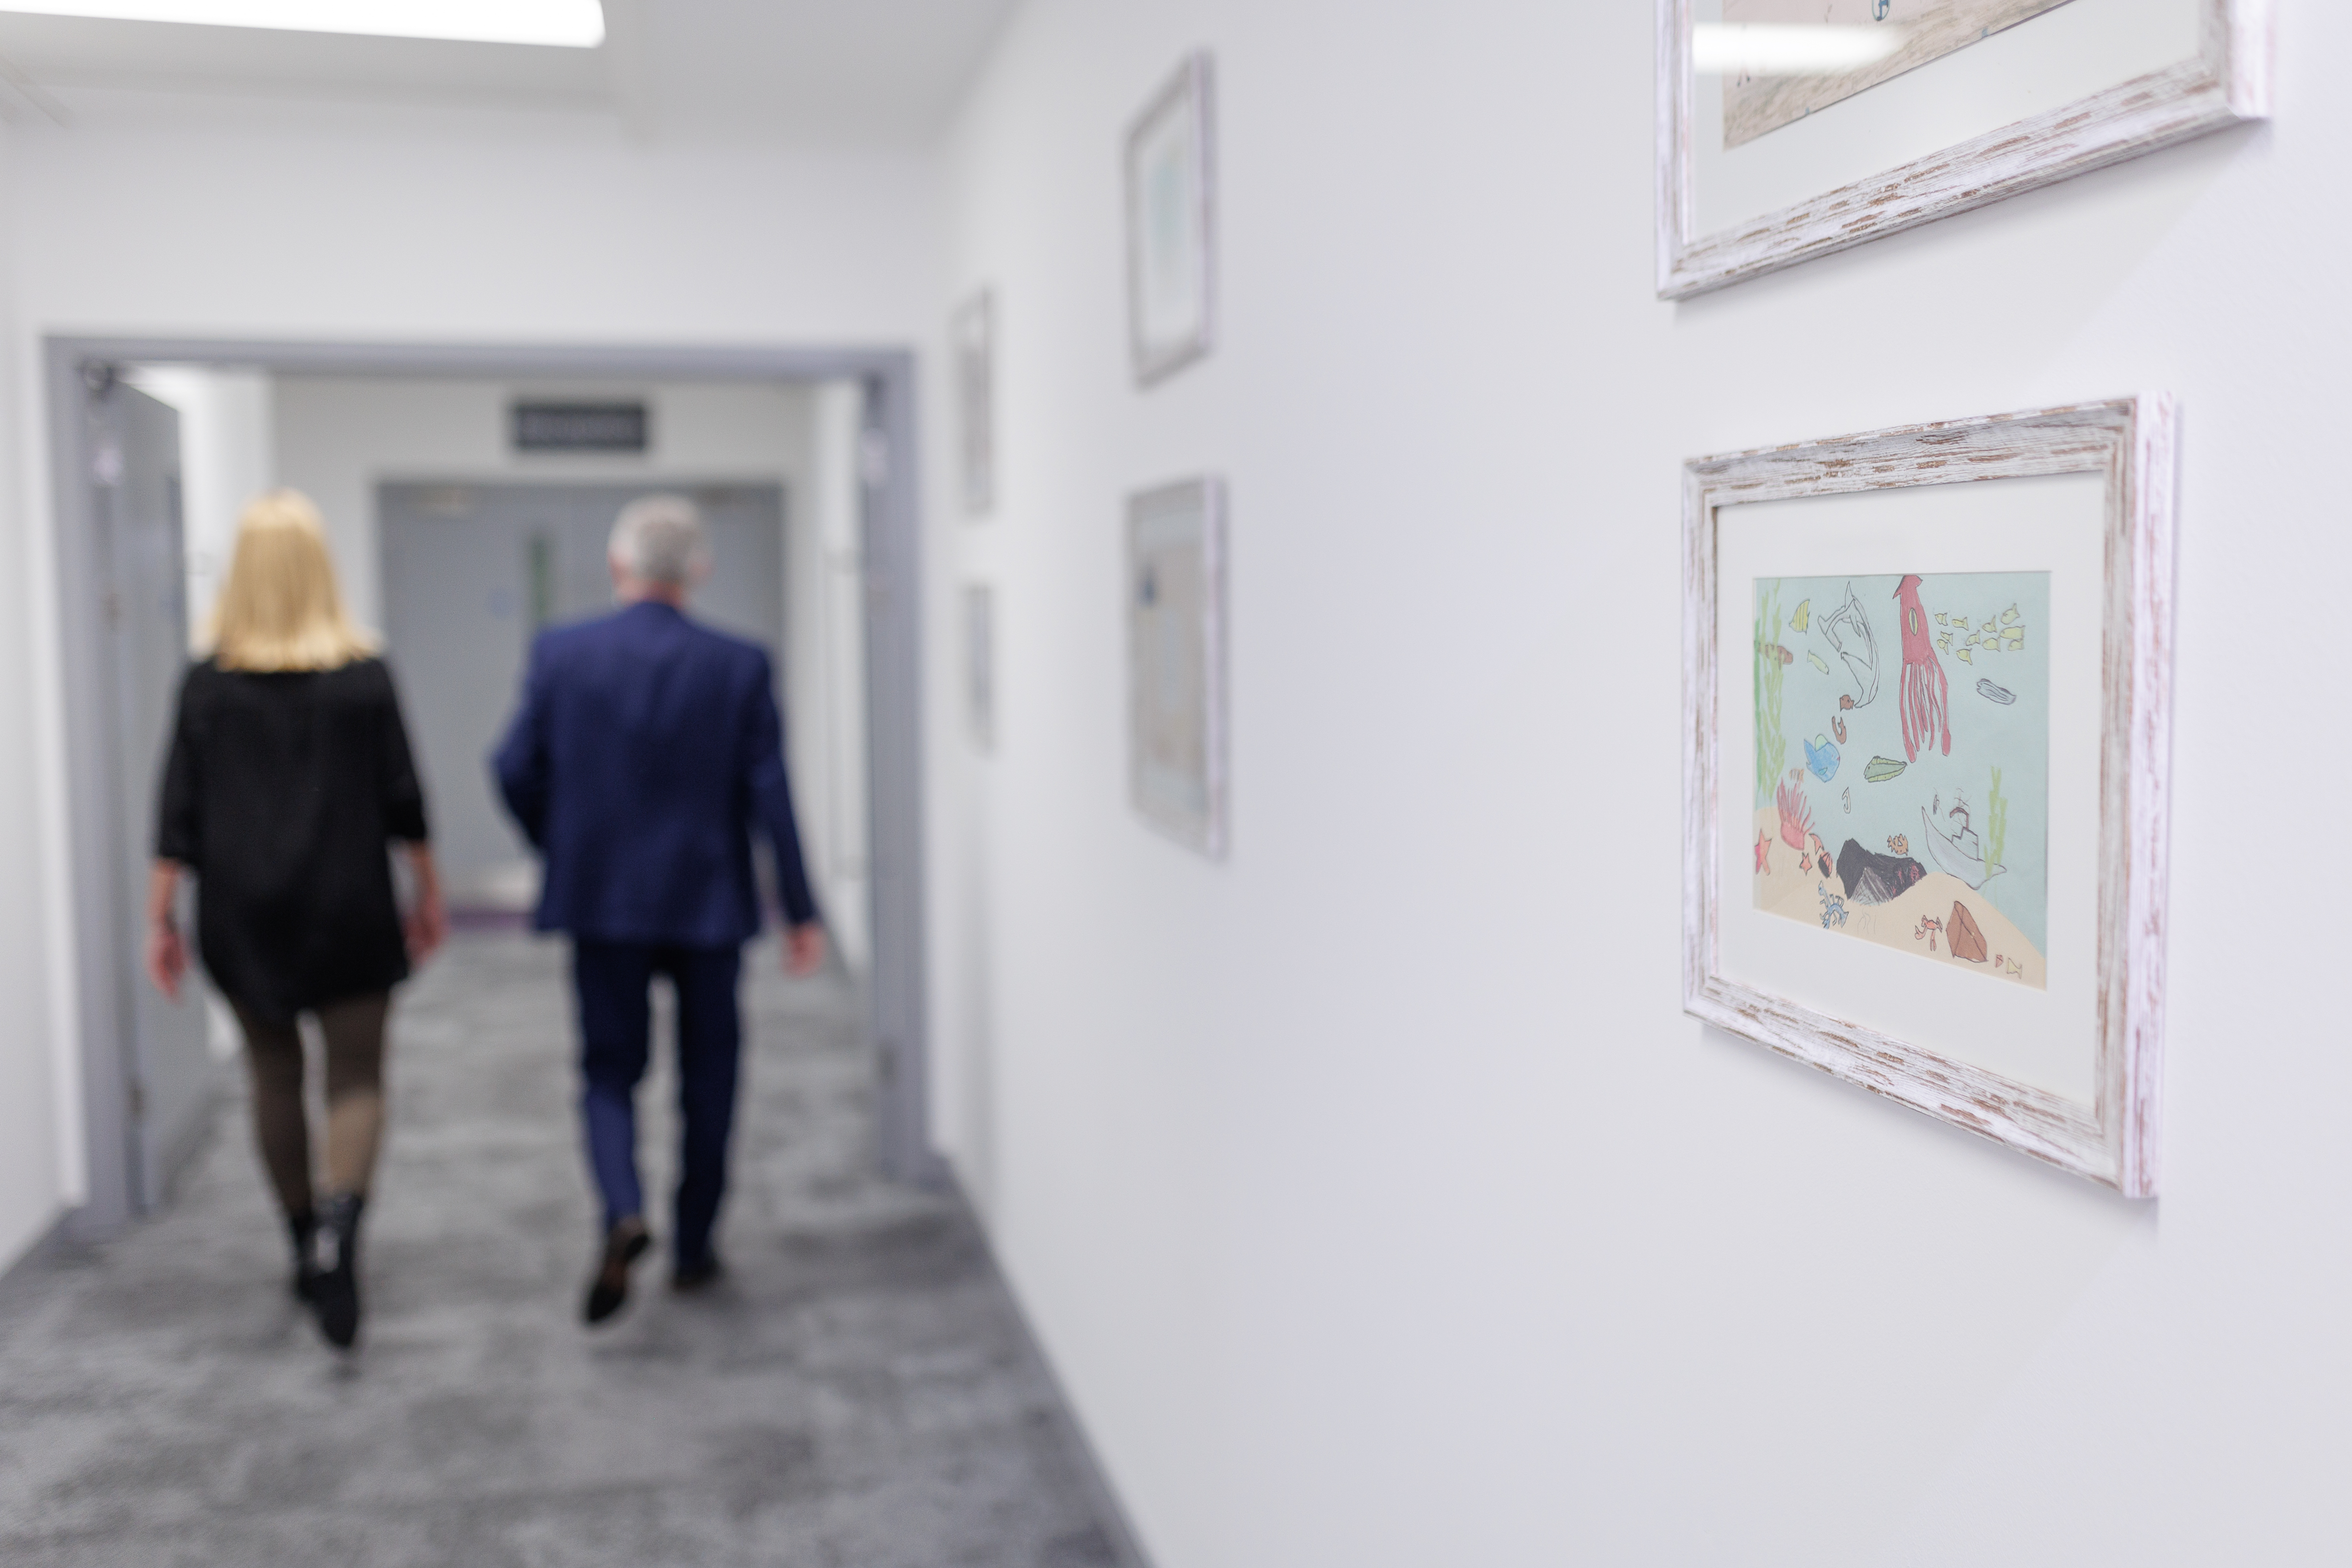 Picture of 2 people walking down a corridor